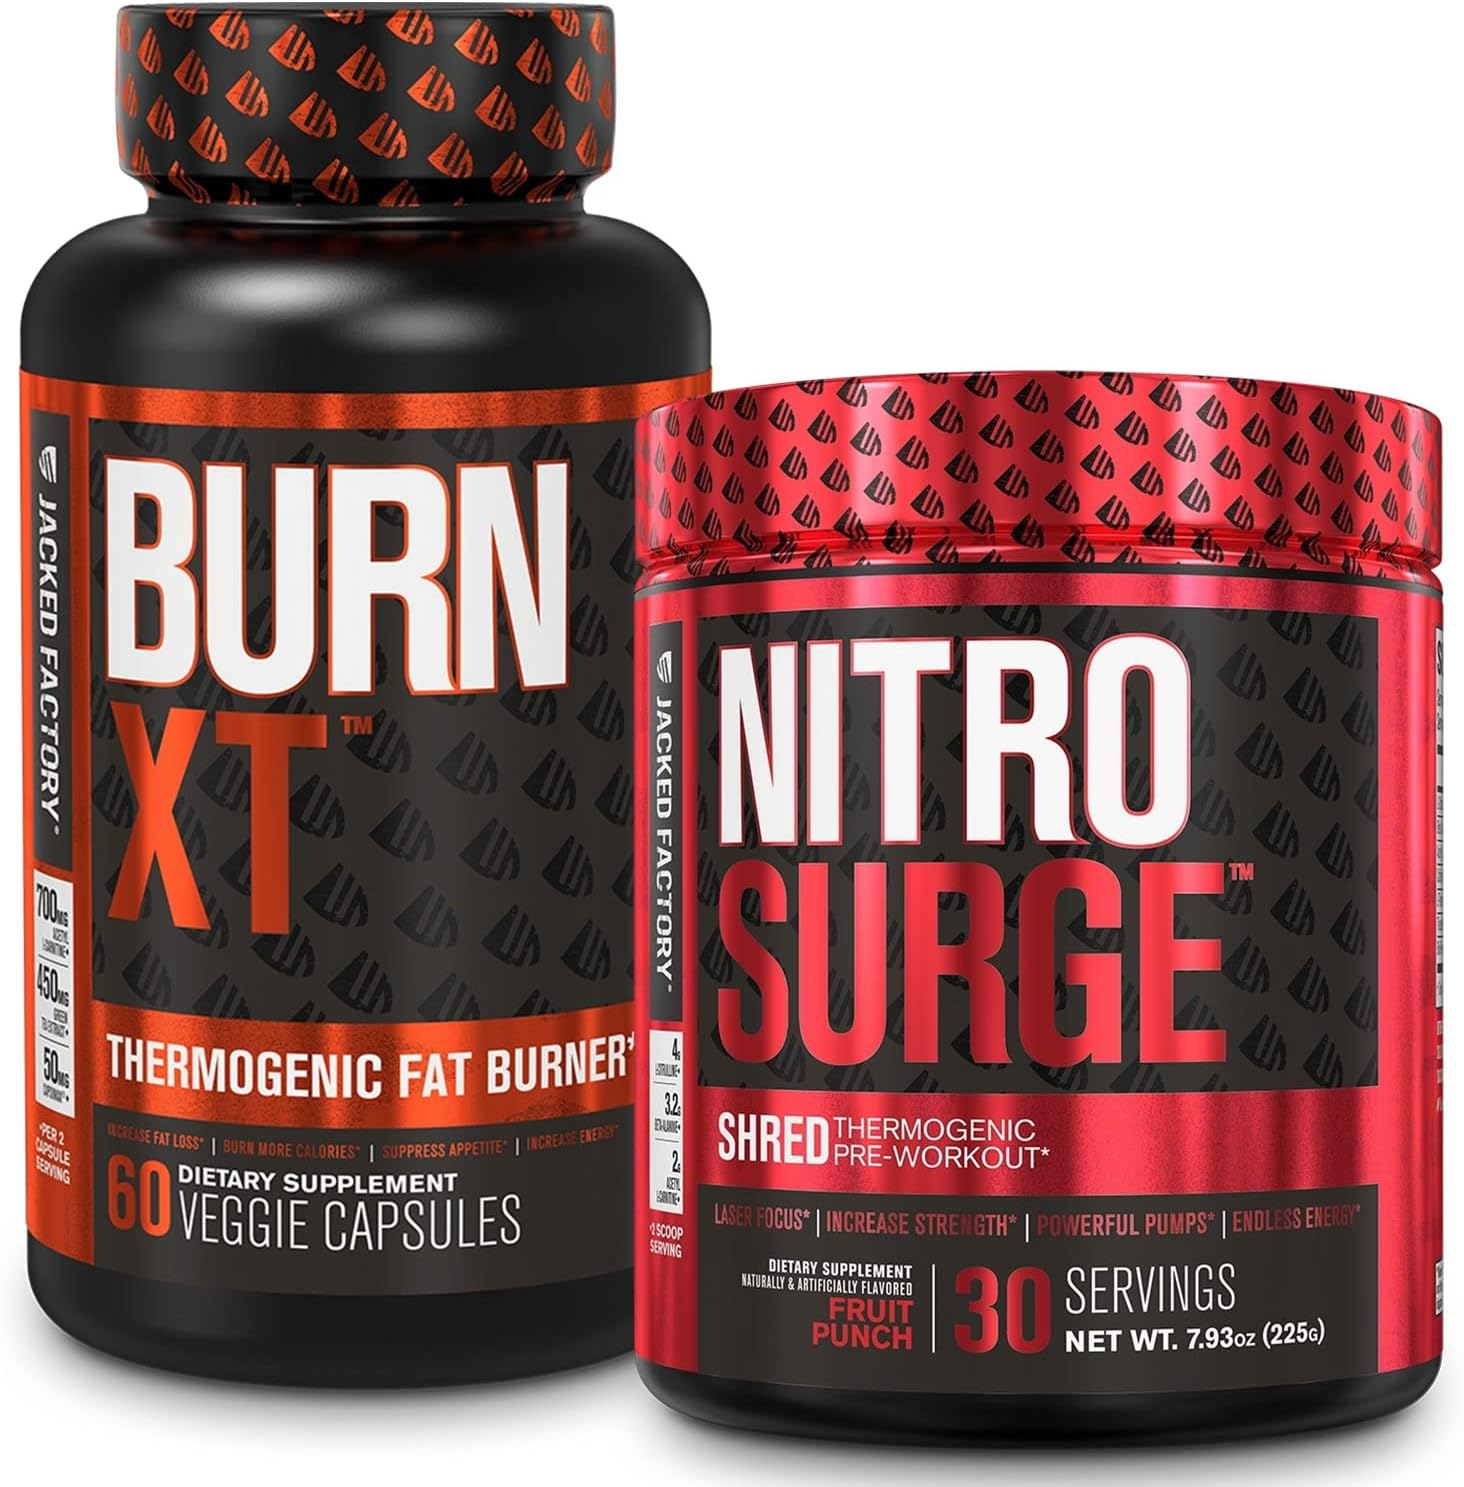 Jacked Factory Burn-XT Thermogenic Fat Burner  NITROSURGE Shred Thermogenic Pre-Workout in Fruit Punch for Men  Women